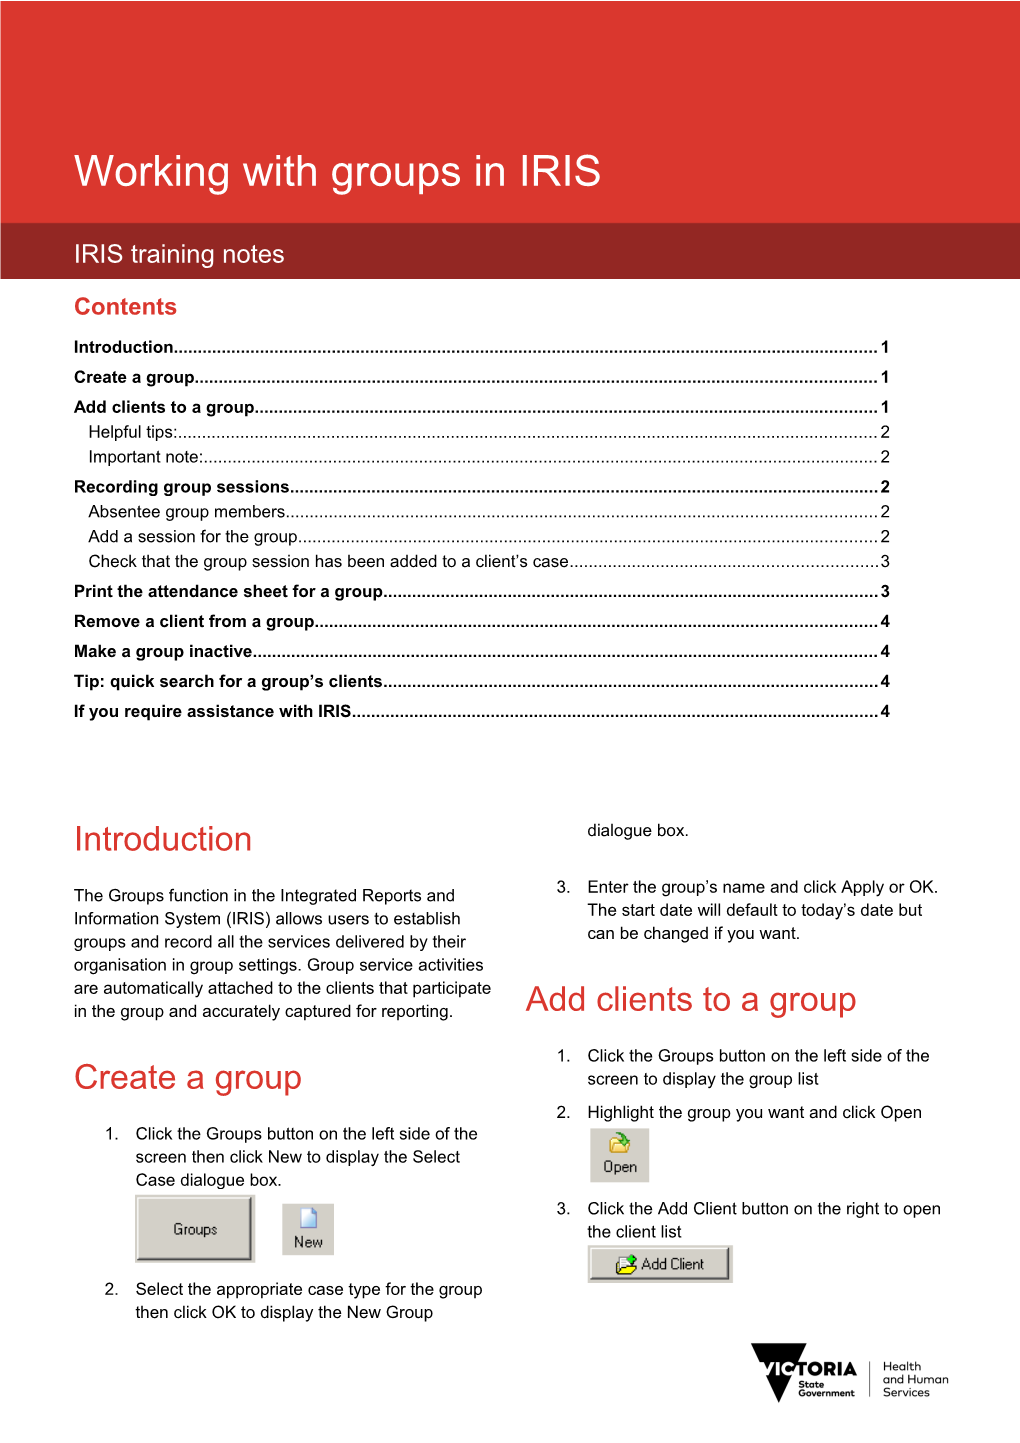 IRIS Training Notes - Working with Groups